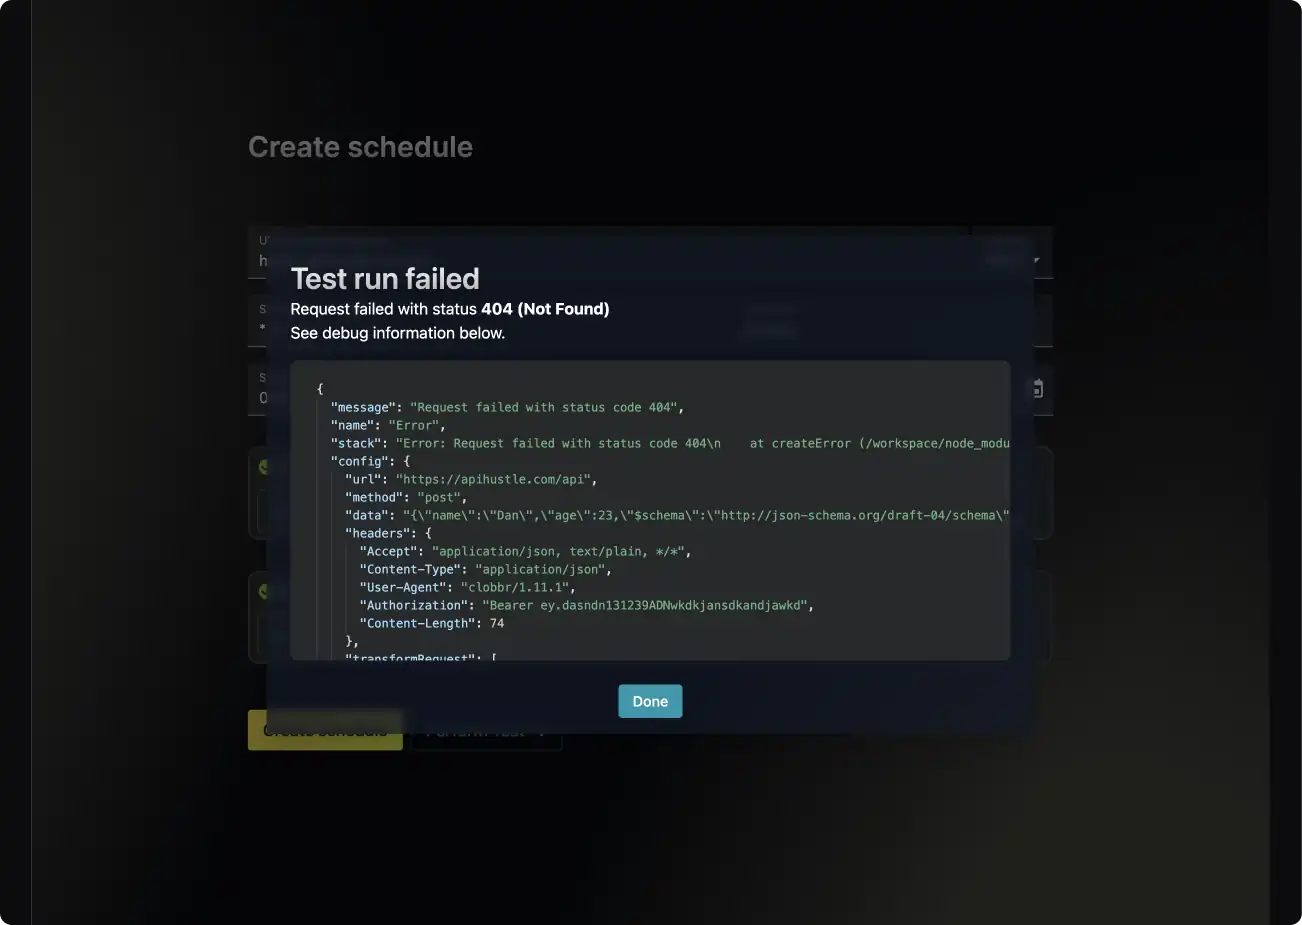 Screenshot of Crontap seeing detailed error of API call to schedule